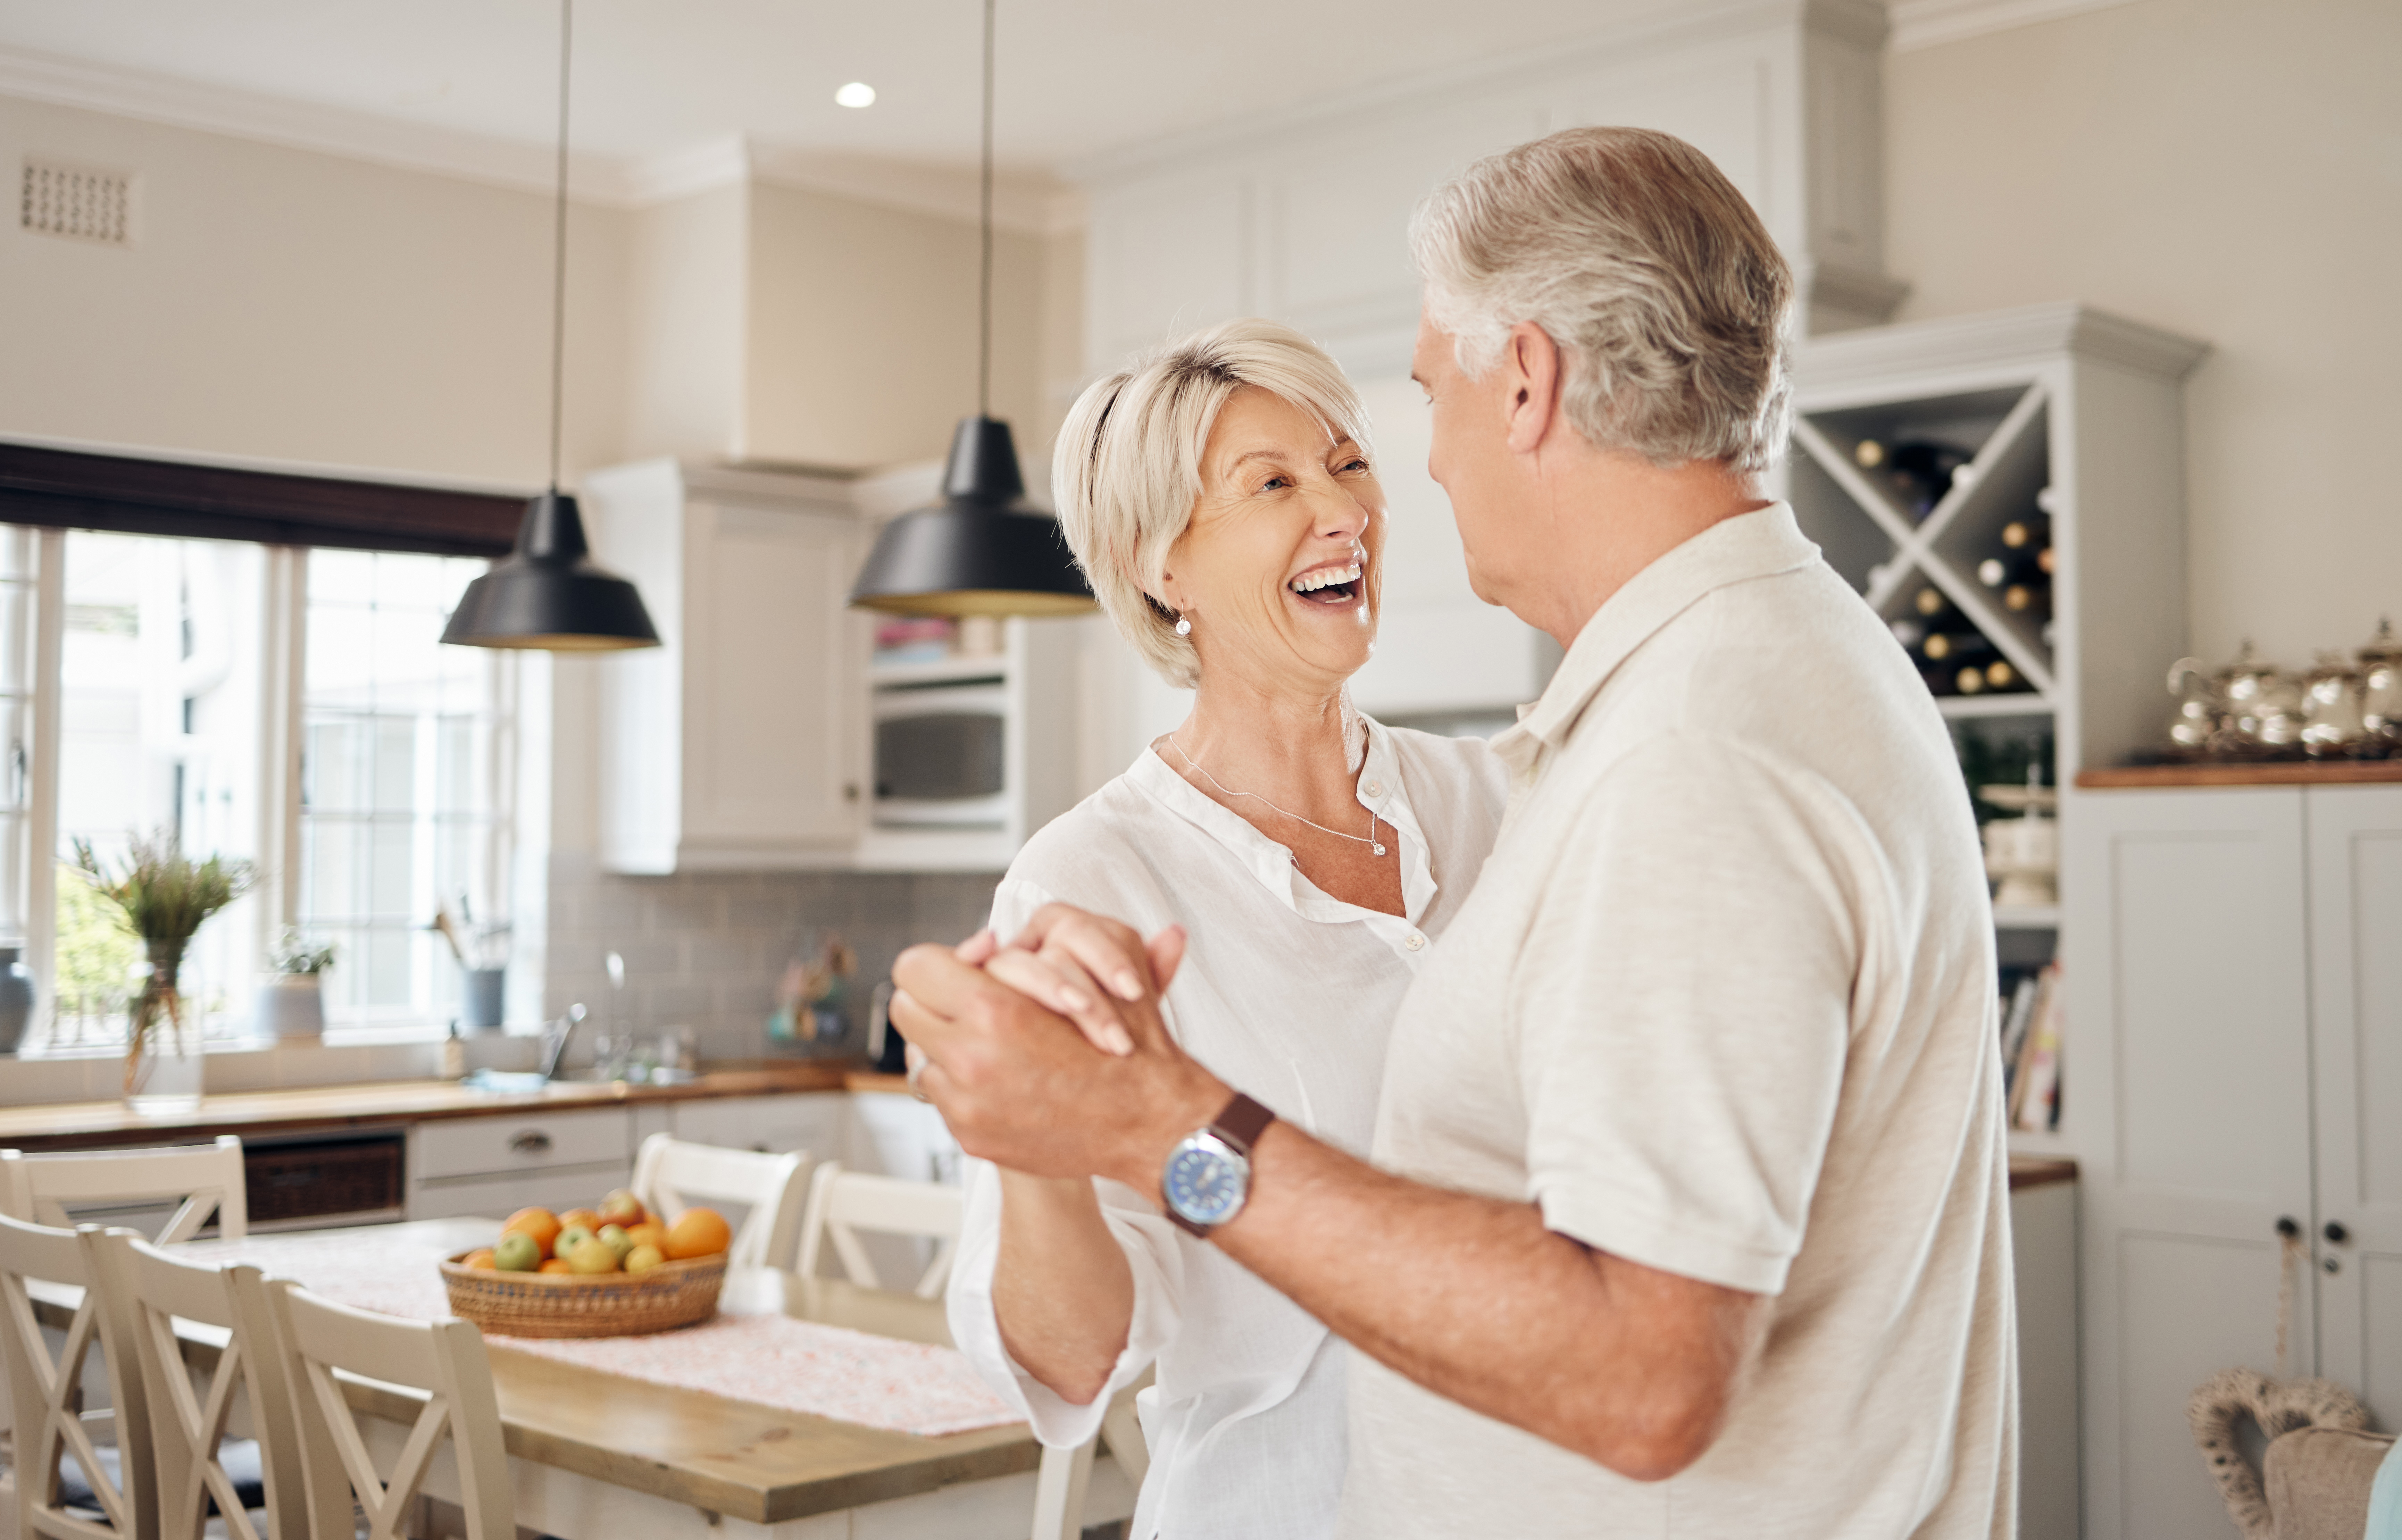 An older couple dancing in a kitchen